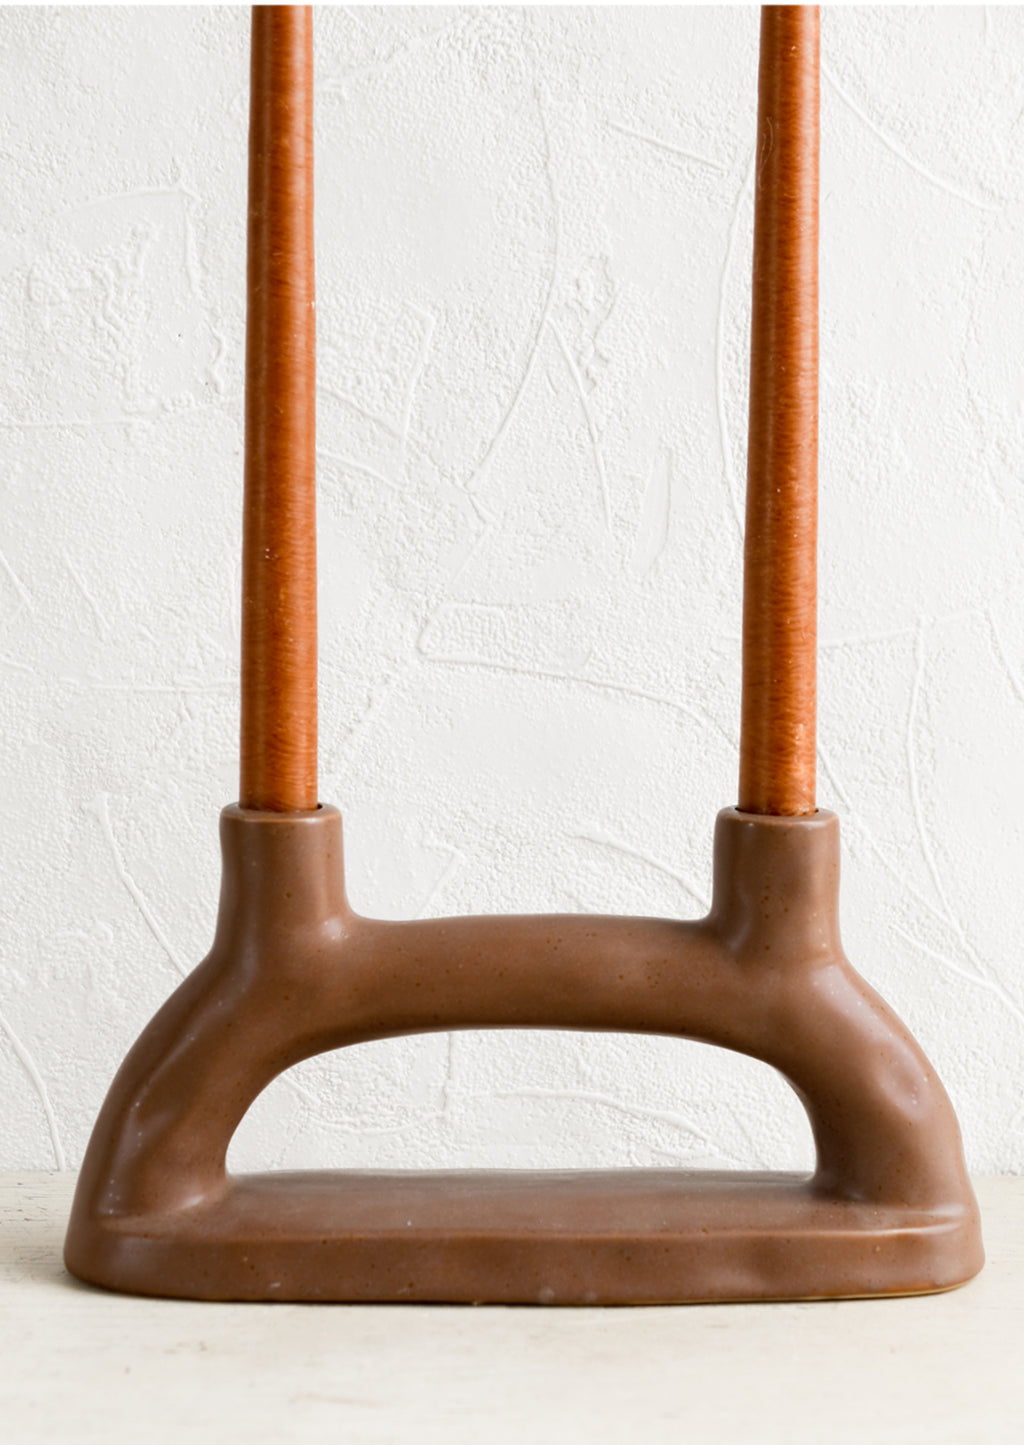 2: A brown ceramic candleholder for two candles.